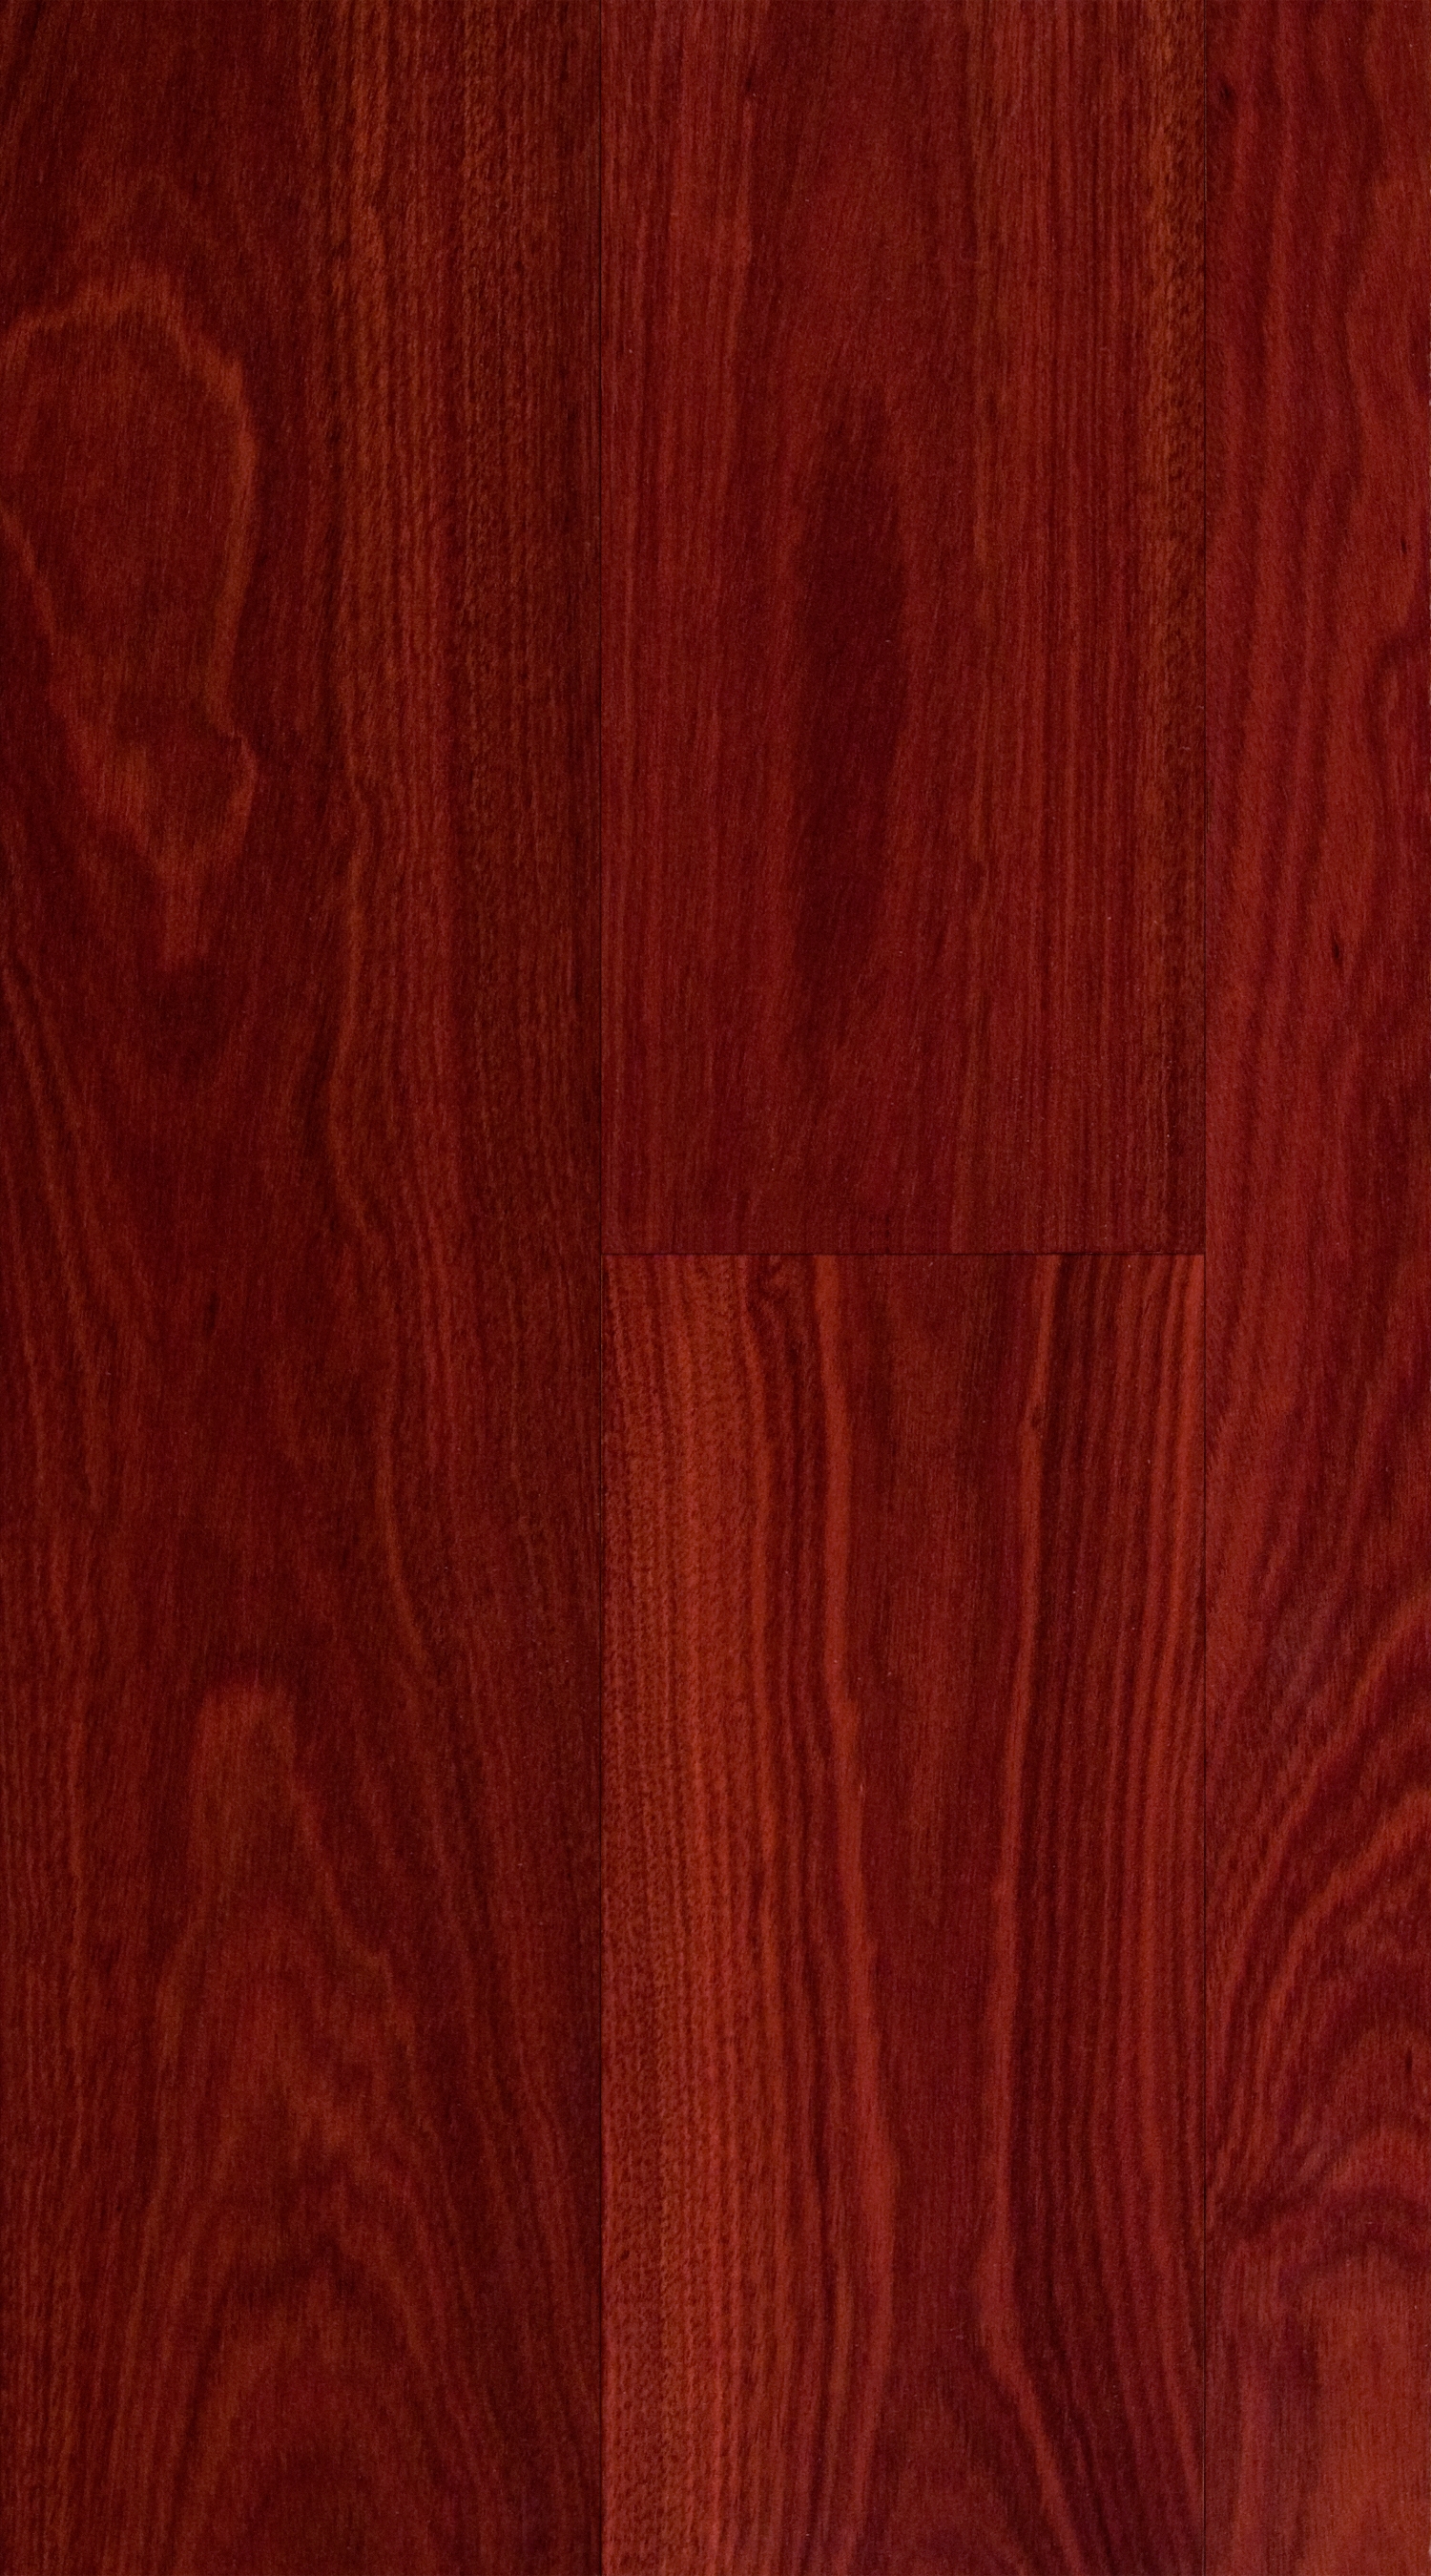 Bellawood 3 4 In Select Bloodwood Solid Hardwood Flooring 5 Wide Ll